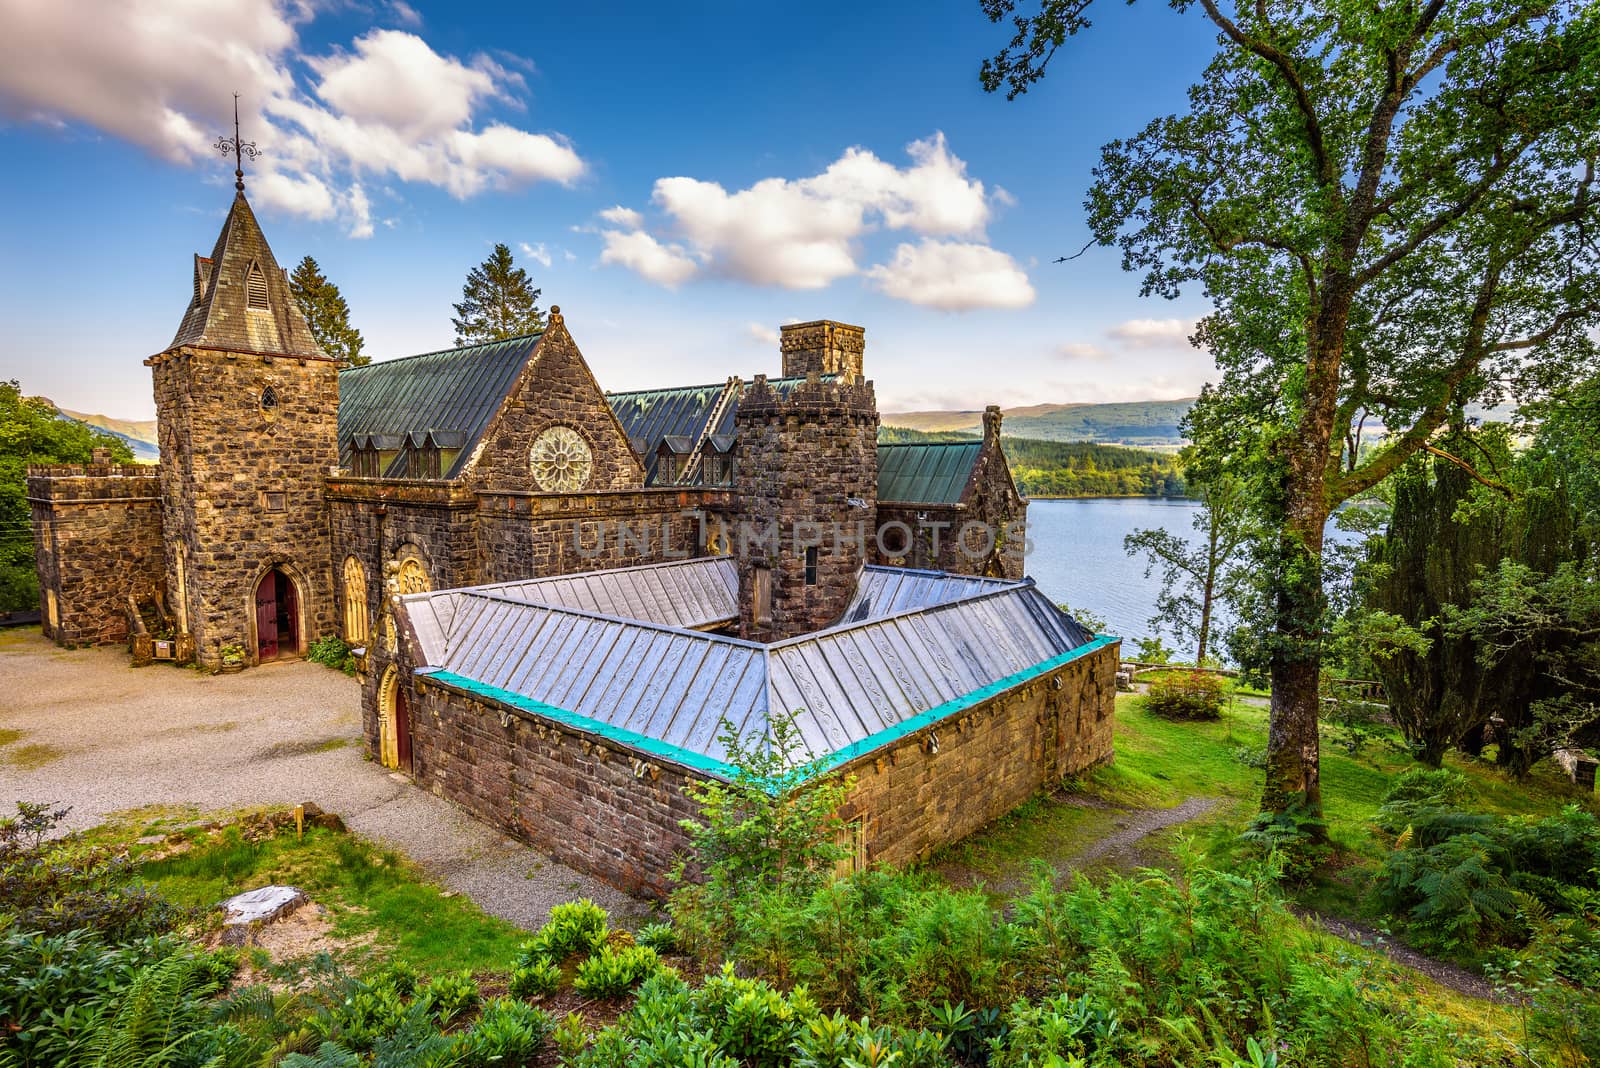 St Conans Kirk located on the banks of Loch Awe,  Scotland by nickfox